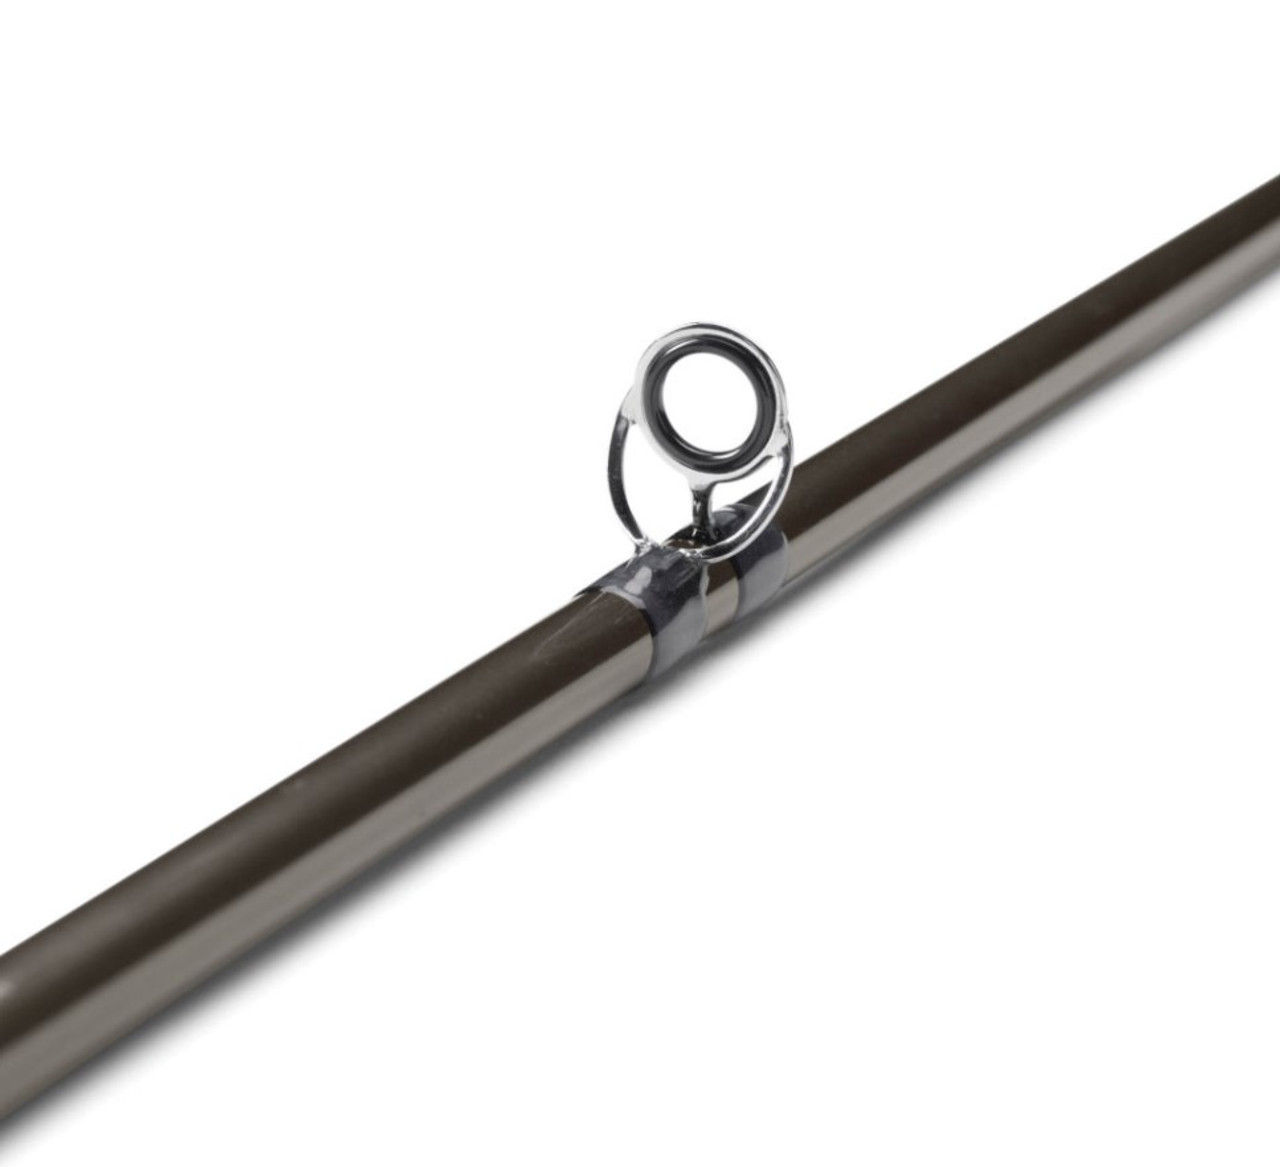 Apex II Fly Rod Outfit, 7-10 wt.